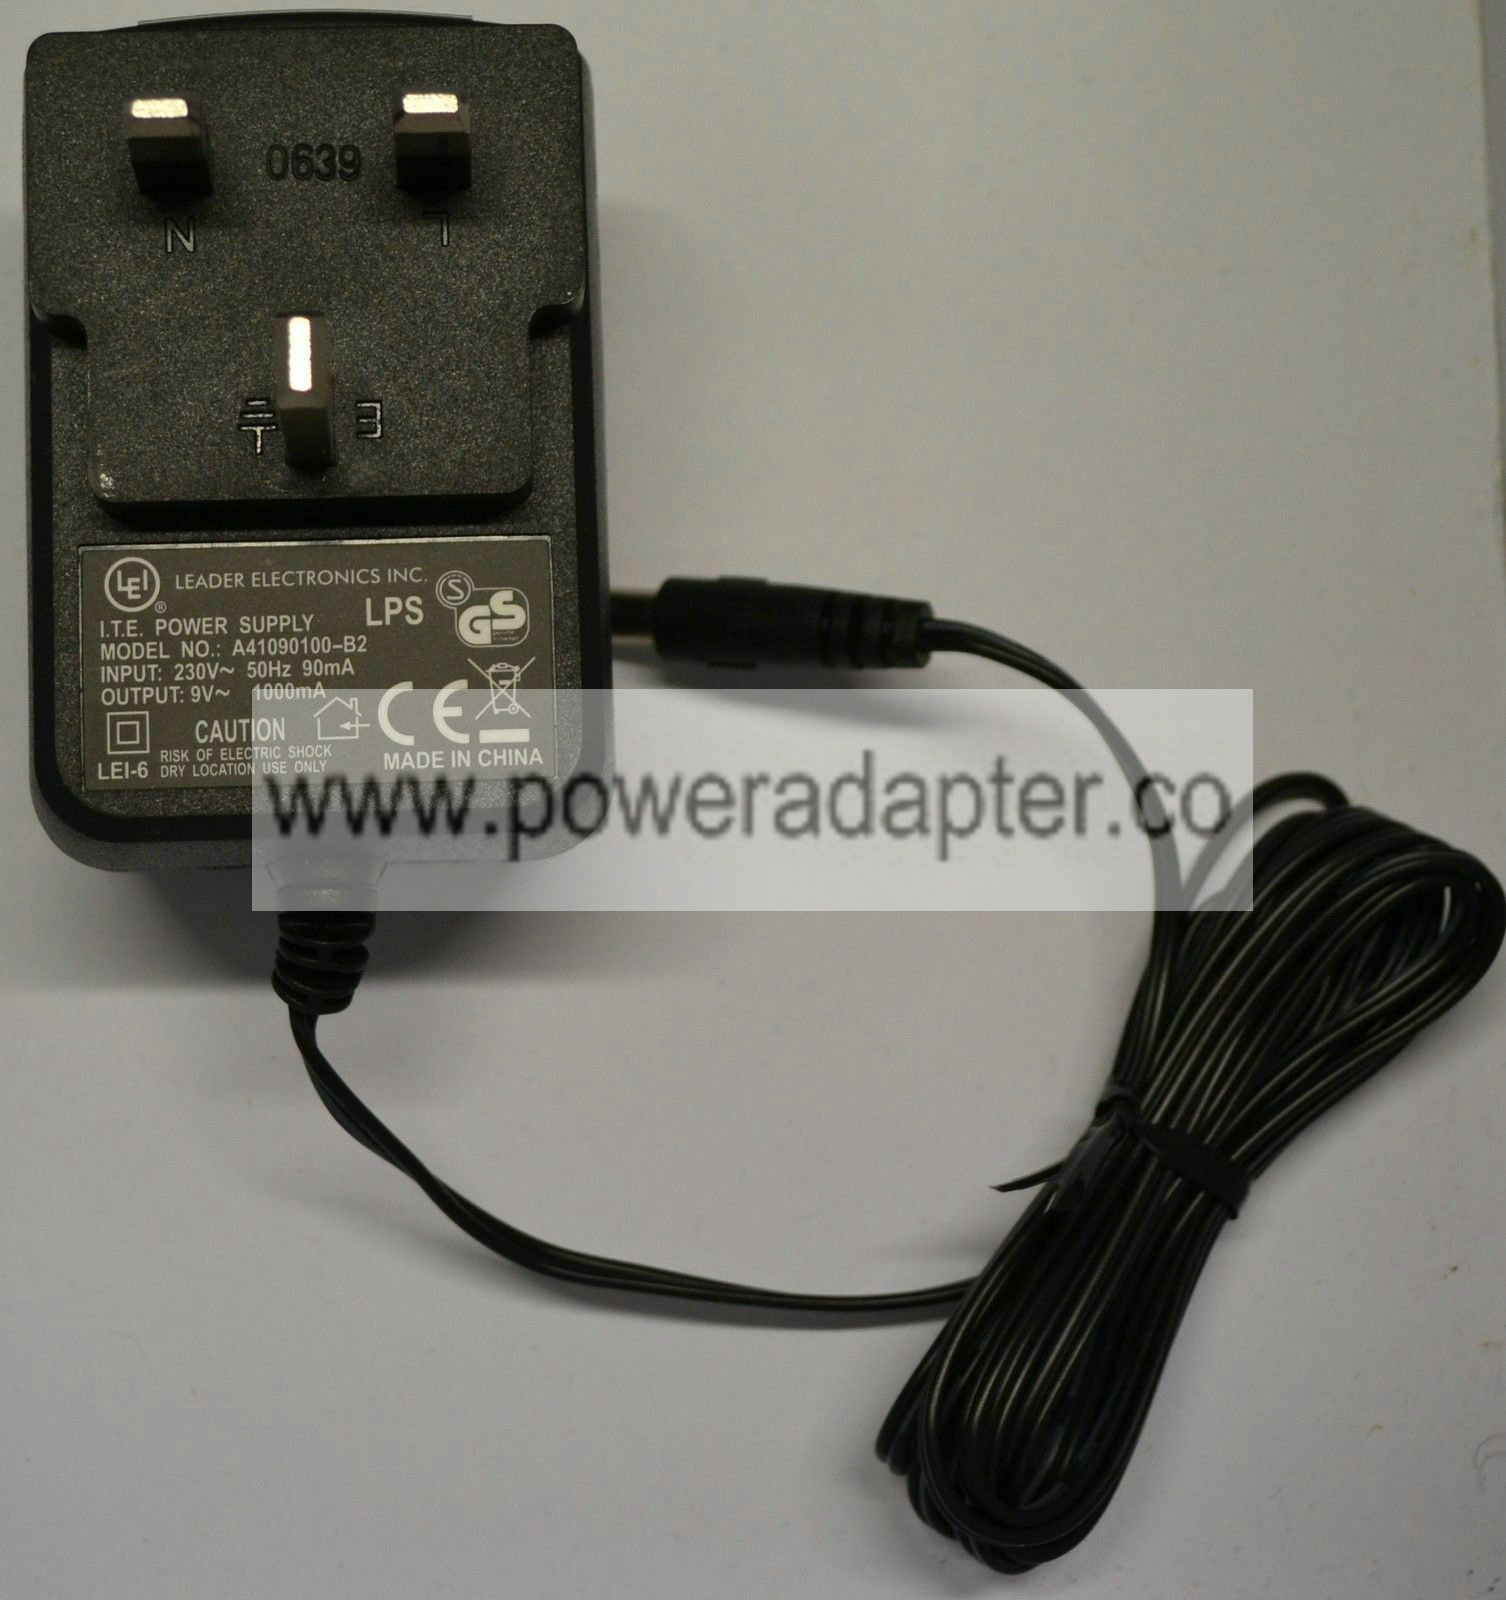 NEW LEI Power Supply Adapter 9V 1000mA / 1A AC Output Dimension 5.5mm x 2.1mm Custom Bundle: No Type: Power Supply Un - Click Image to Close